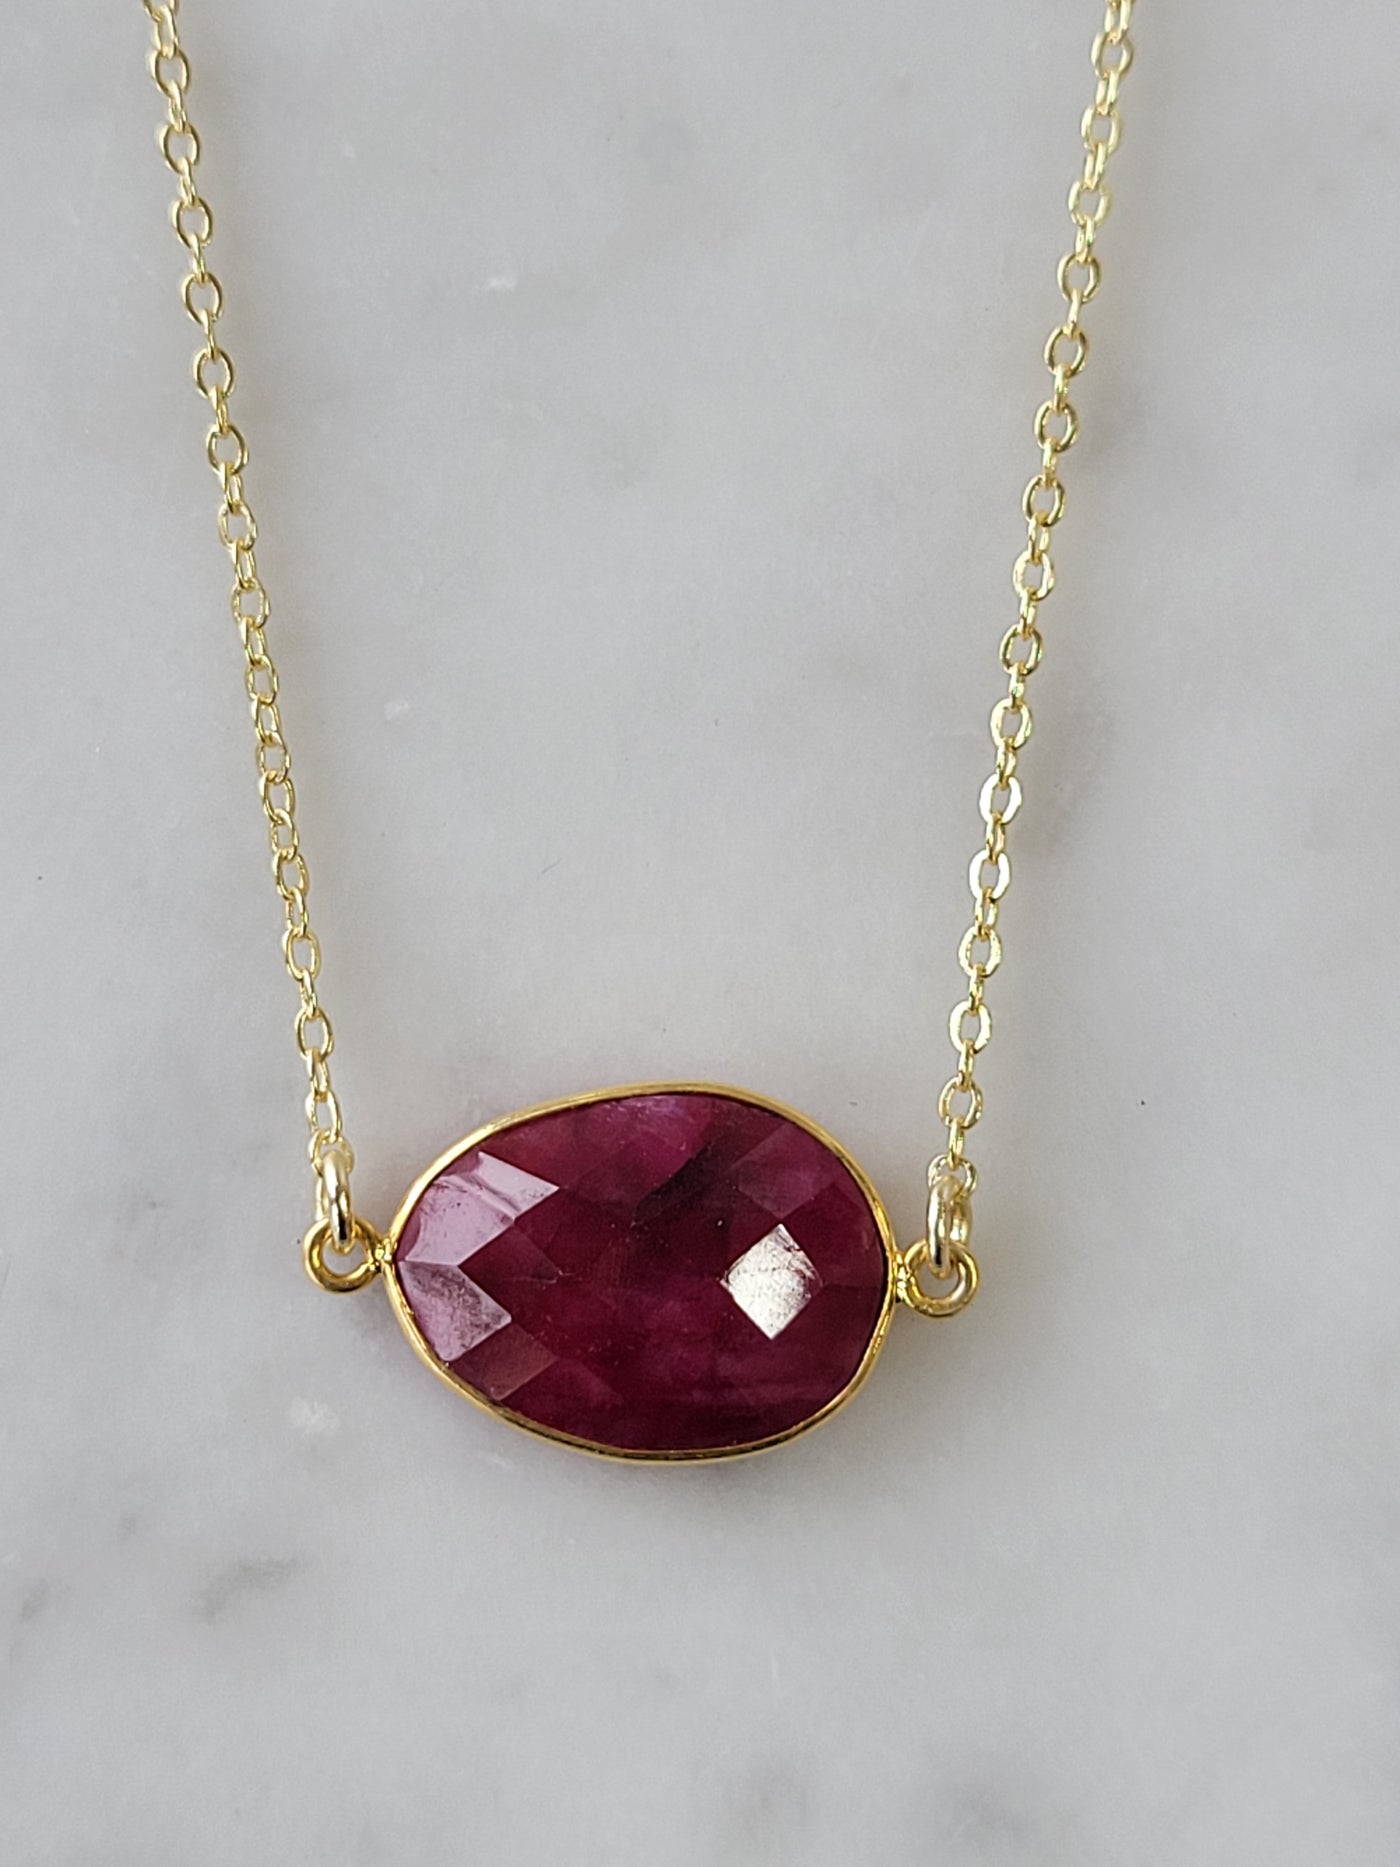 Mrs. Parker Necklace in Ruby